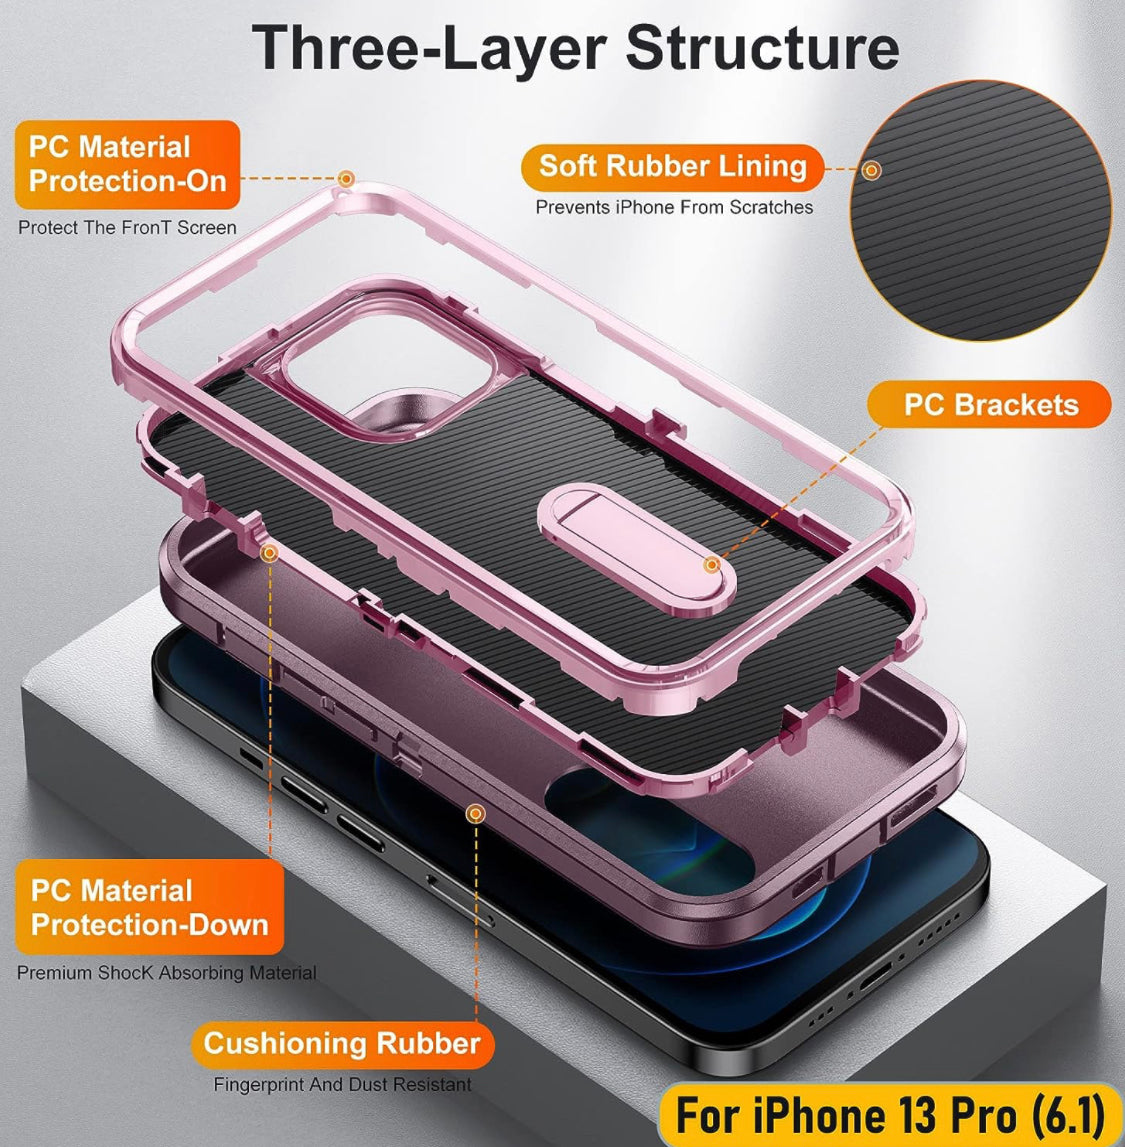 ymxdmd Case is Specially Designed for iPhone 13 Pro 6.1 Inch, Full Body Protection Heavy Duty Shock Absorbing 3 in 1 Silicone Rubber Built-in Stand